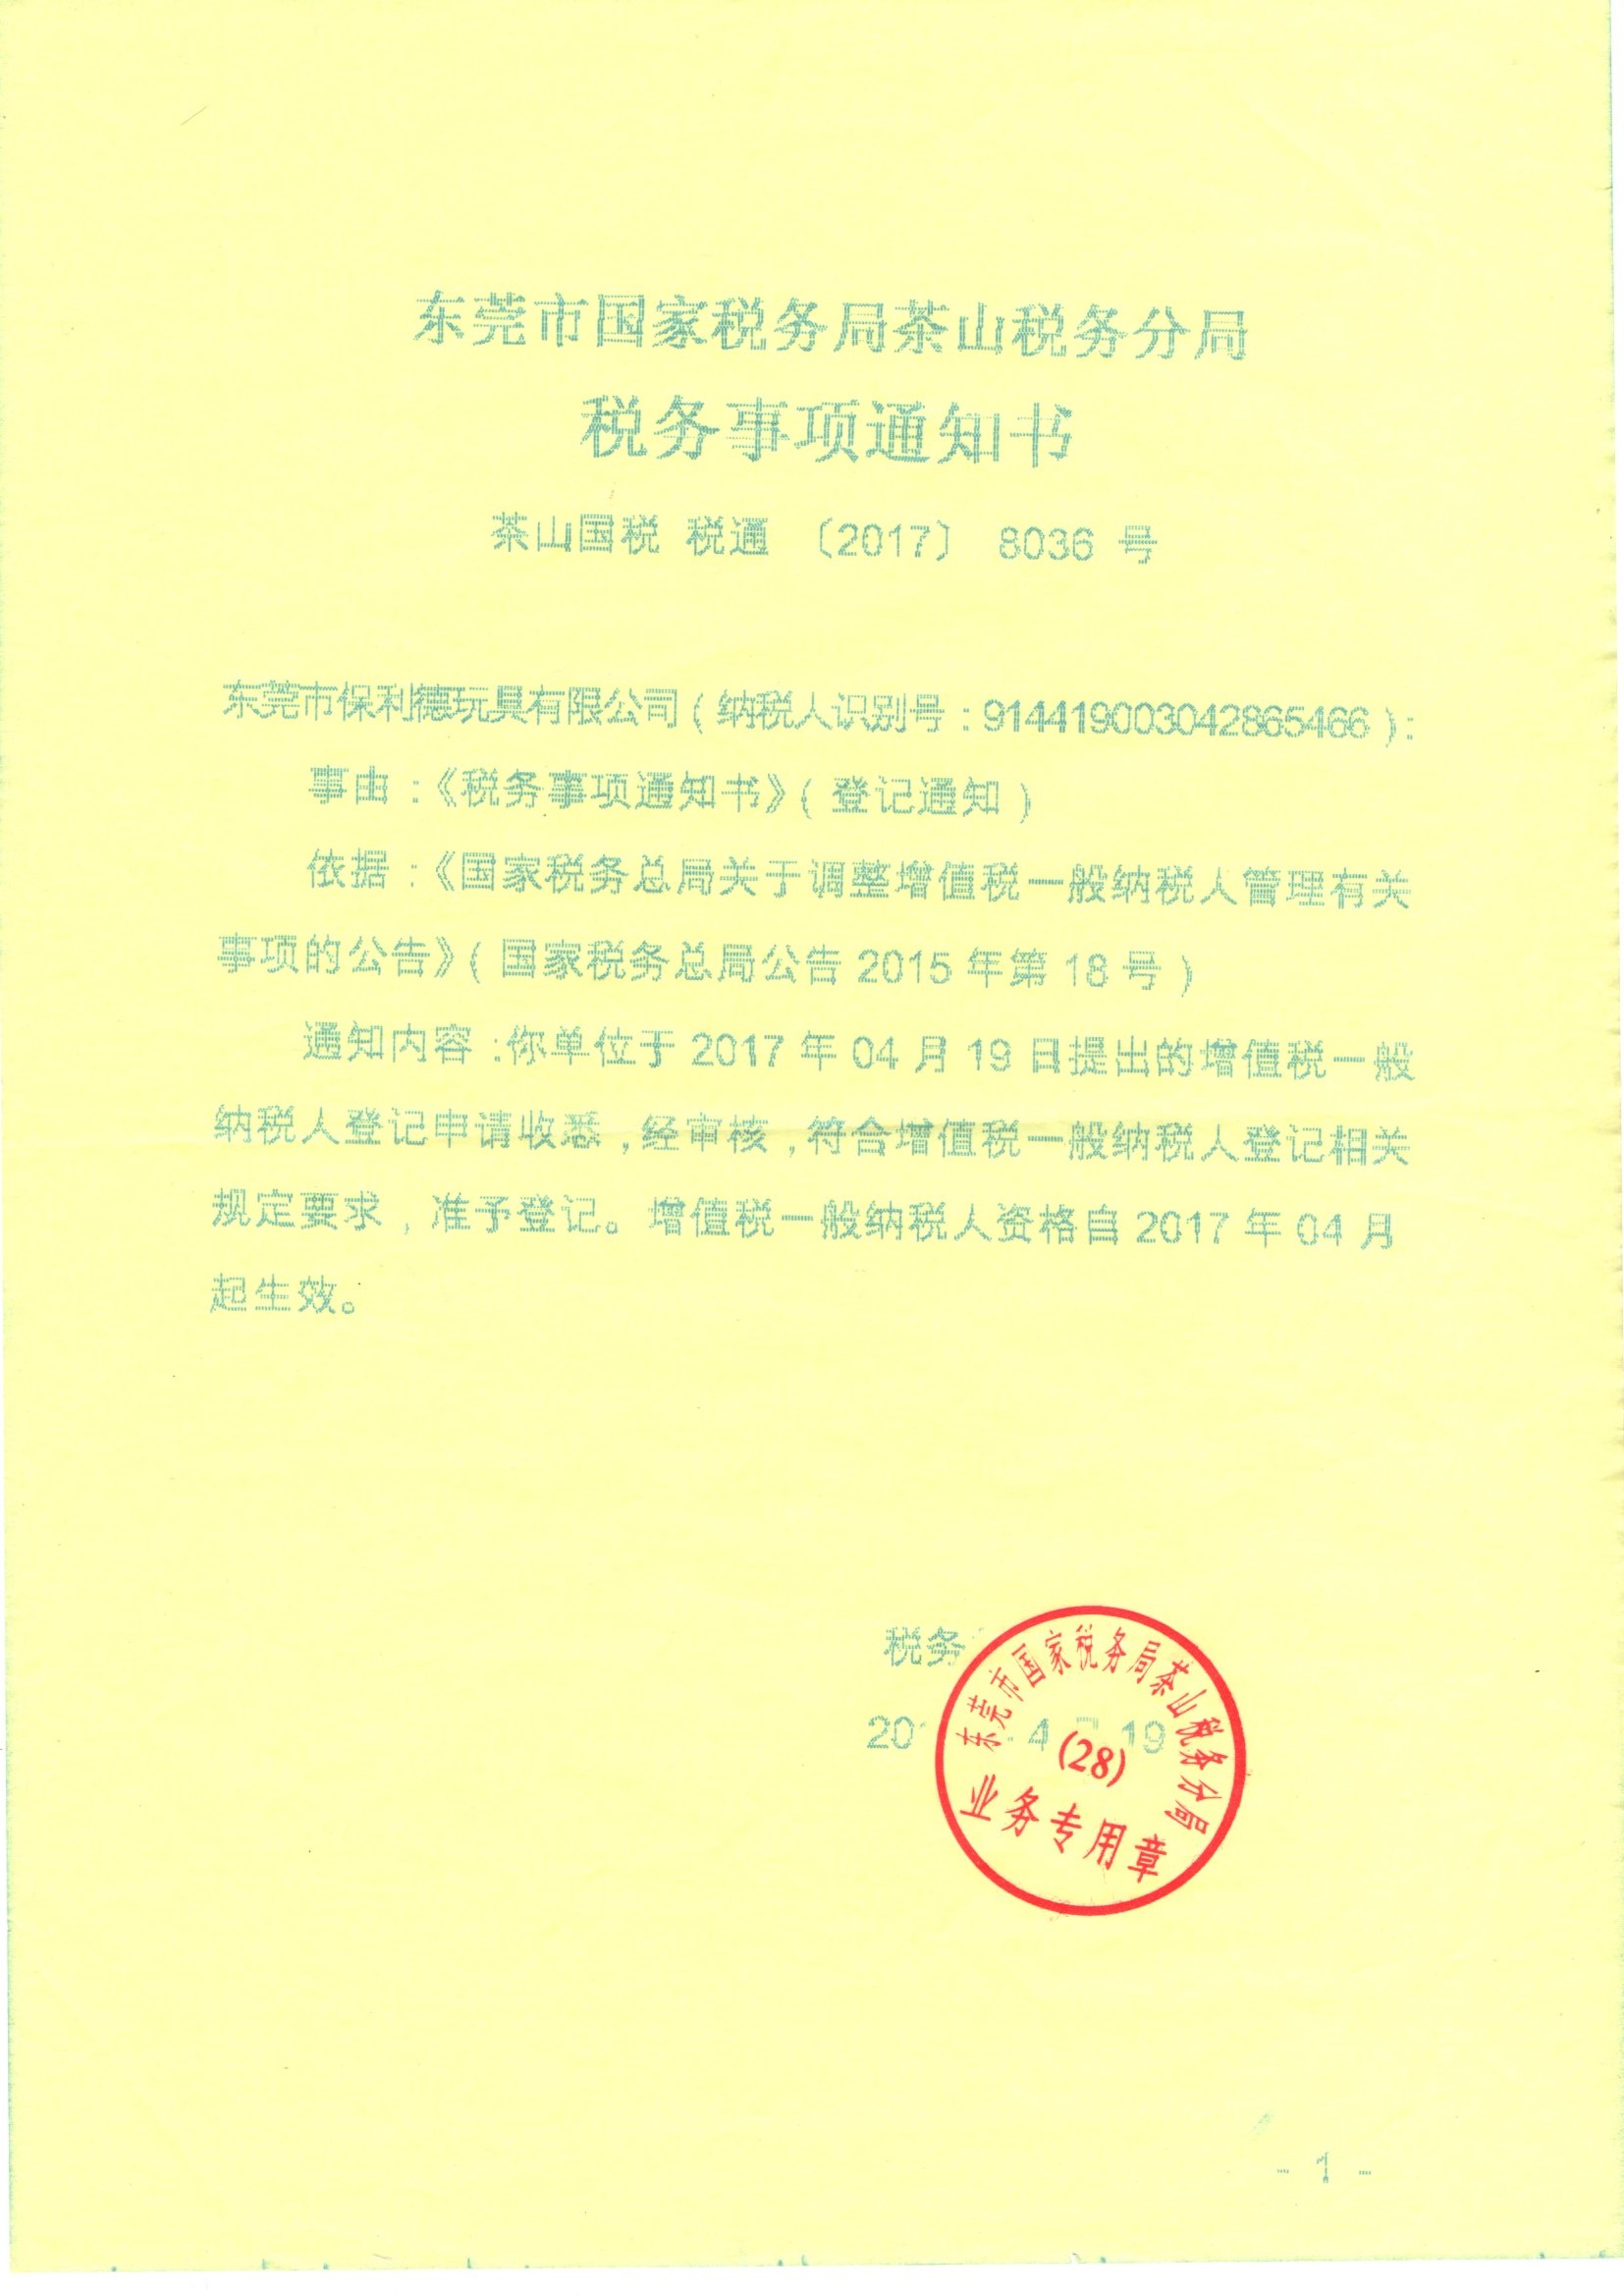  Business License of Paolide Toy 